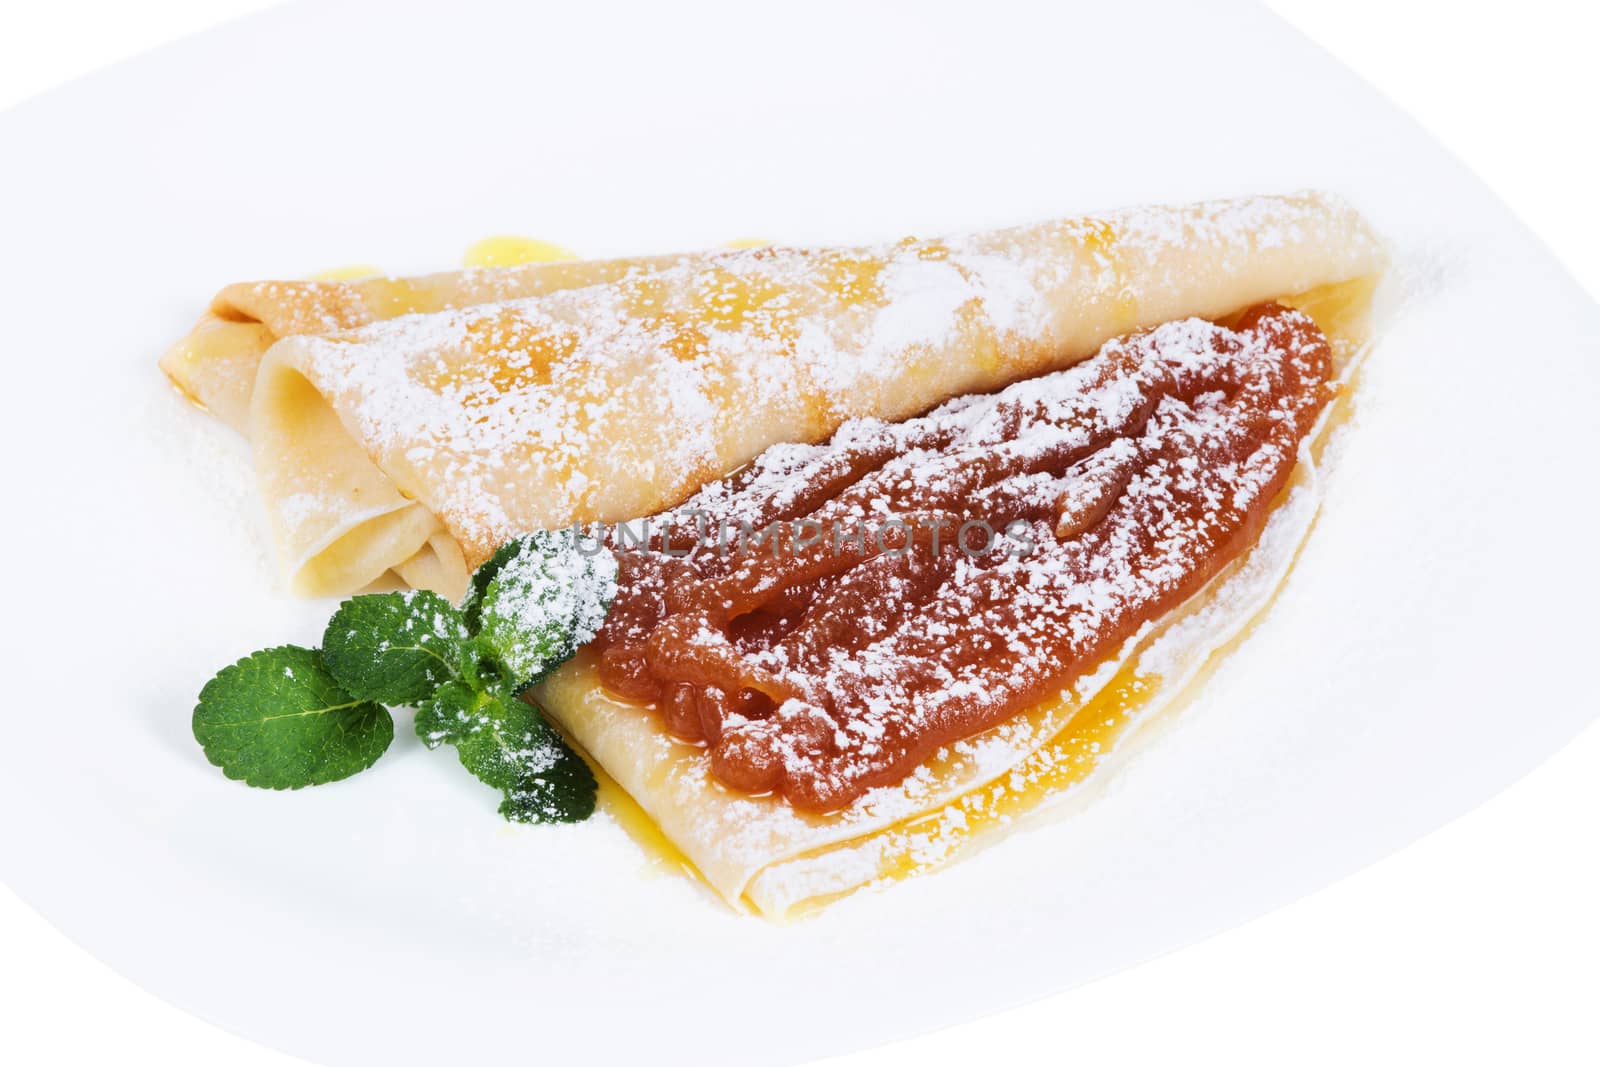 Pancakes with confiture and mint on a plate by kzen